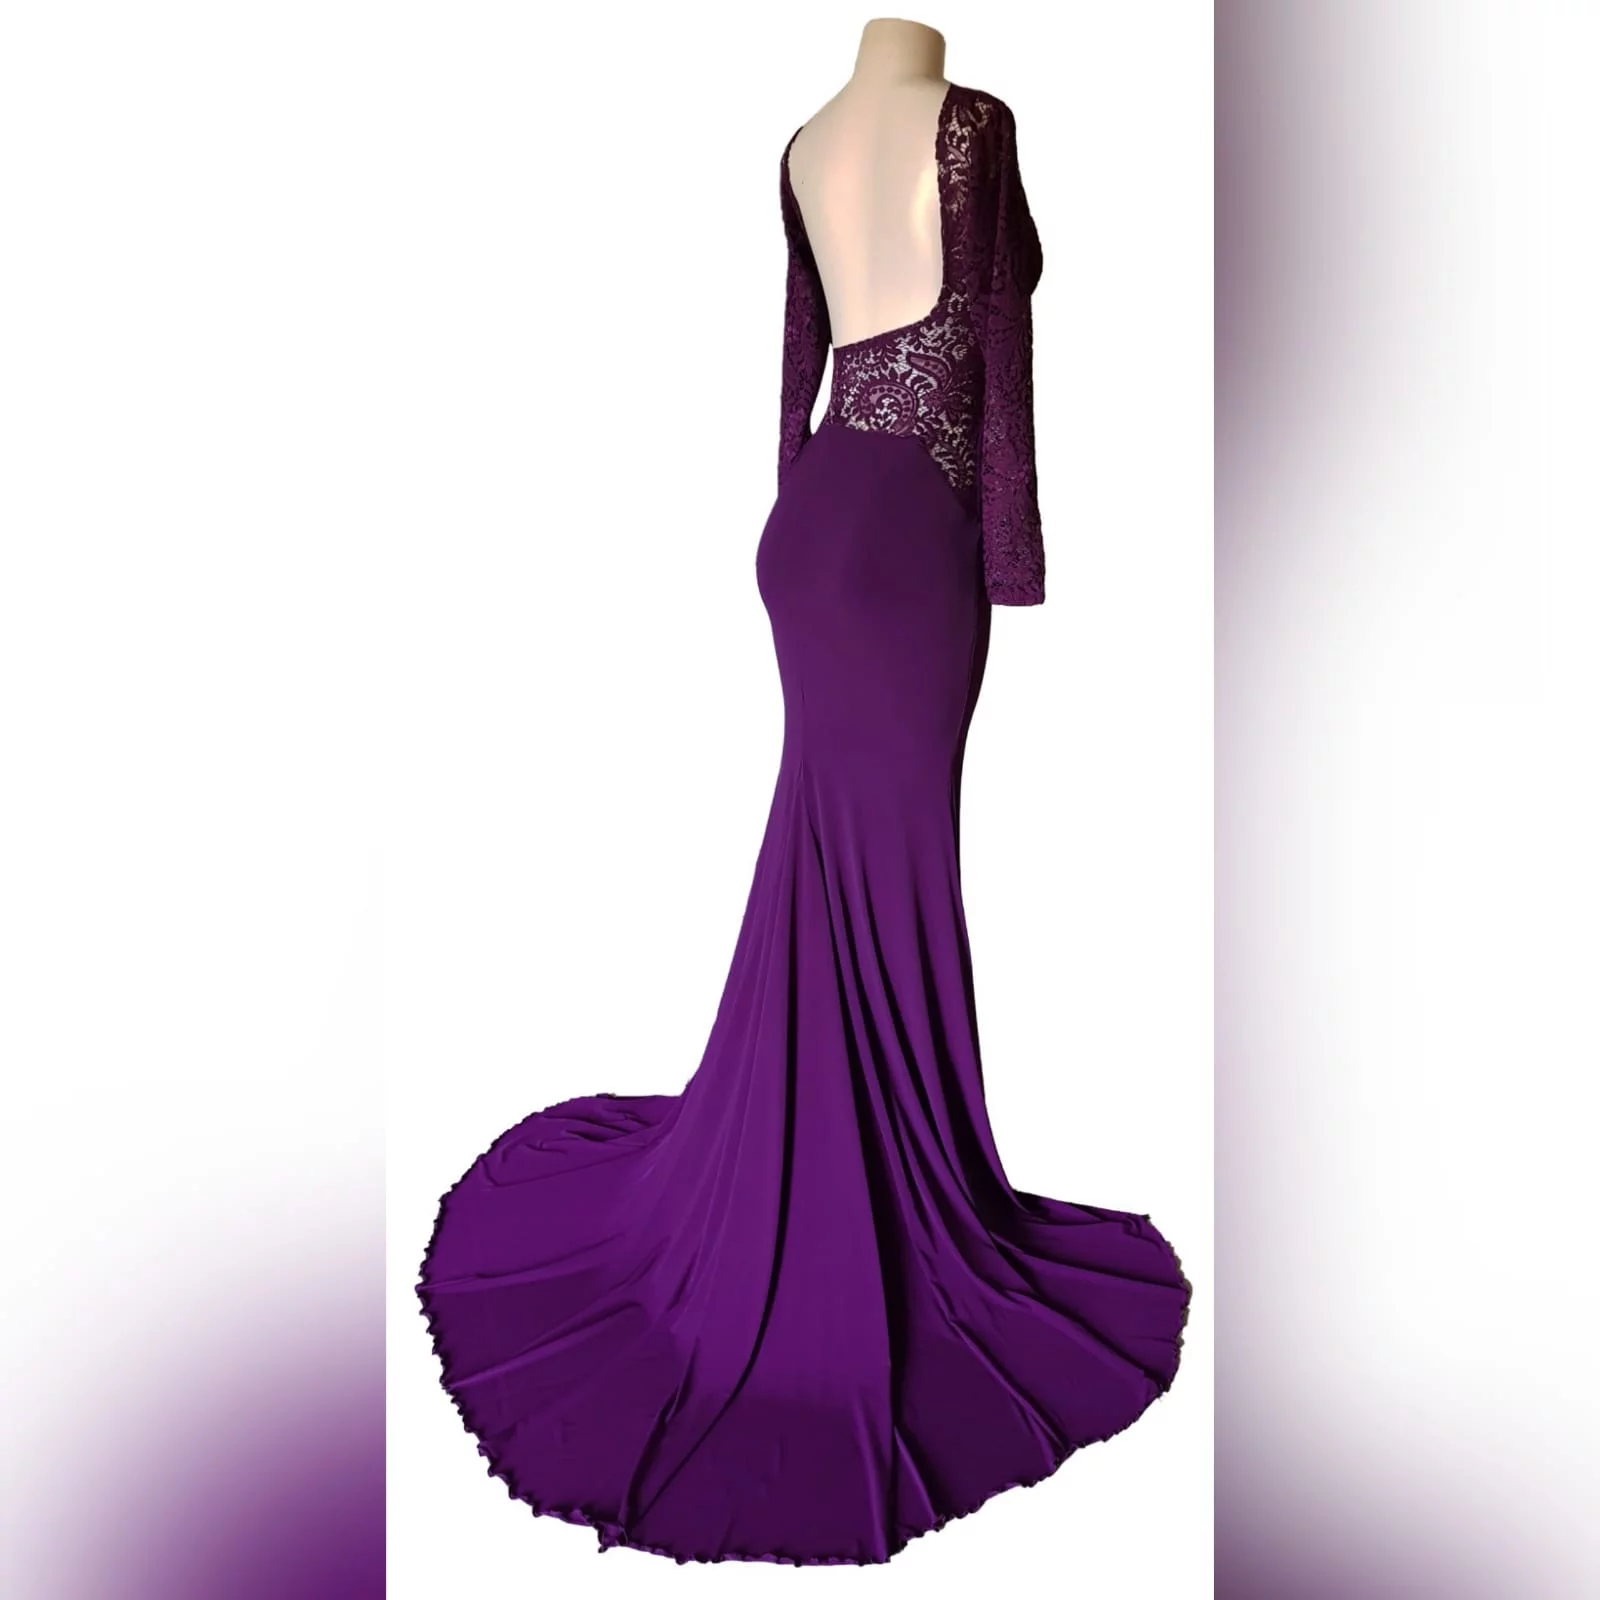 Plum lace bodice soft mermaid matric dance dress 7 plum lace bodice, soft mermaid matric dance dress with a low open rounded open back and hip lace design. With long lace sleeves and a long train.